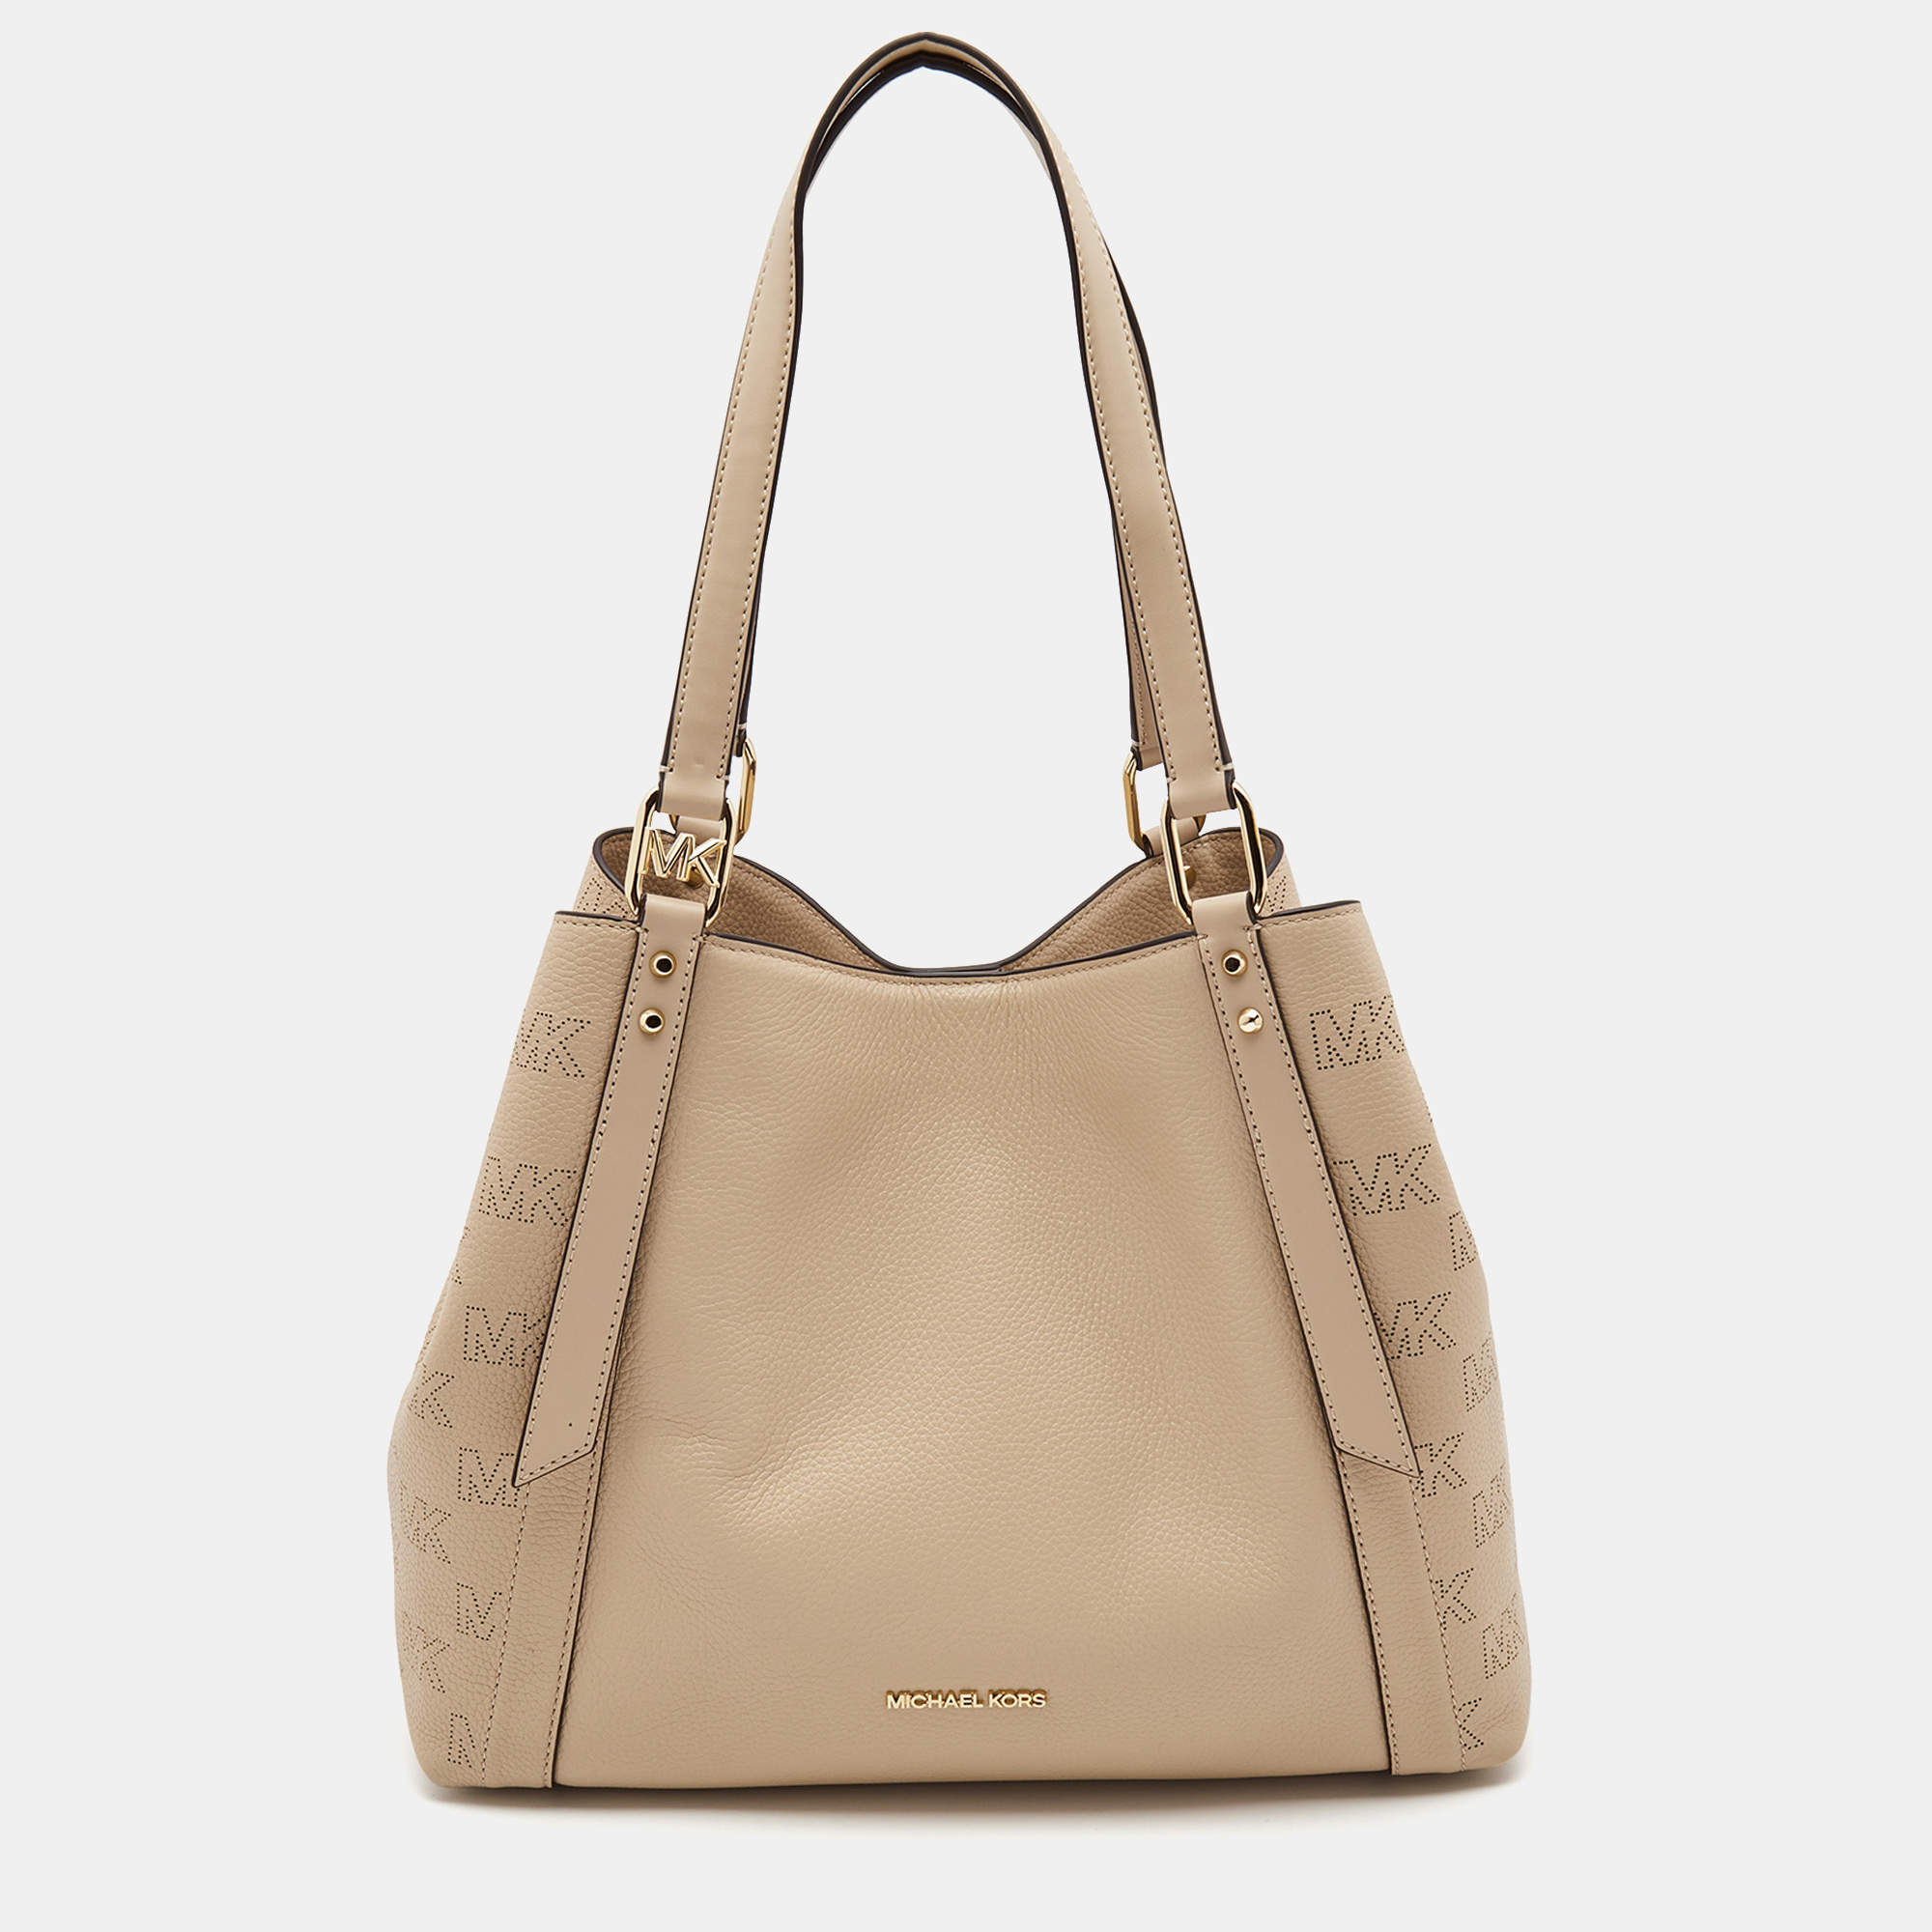 Michael Kors India  Shop Handbags, Sunglasses, Watches and more on